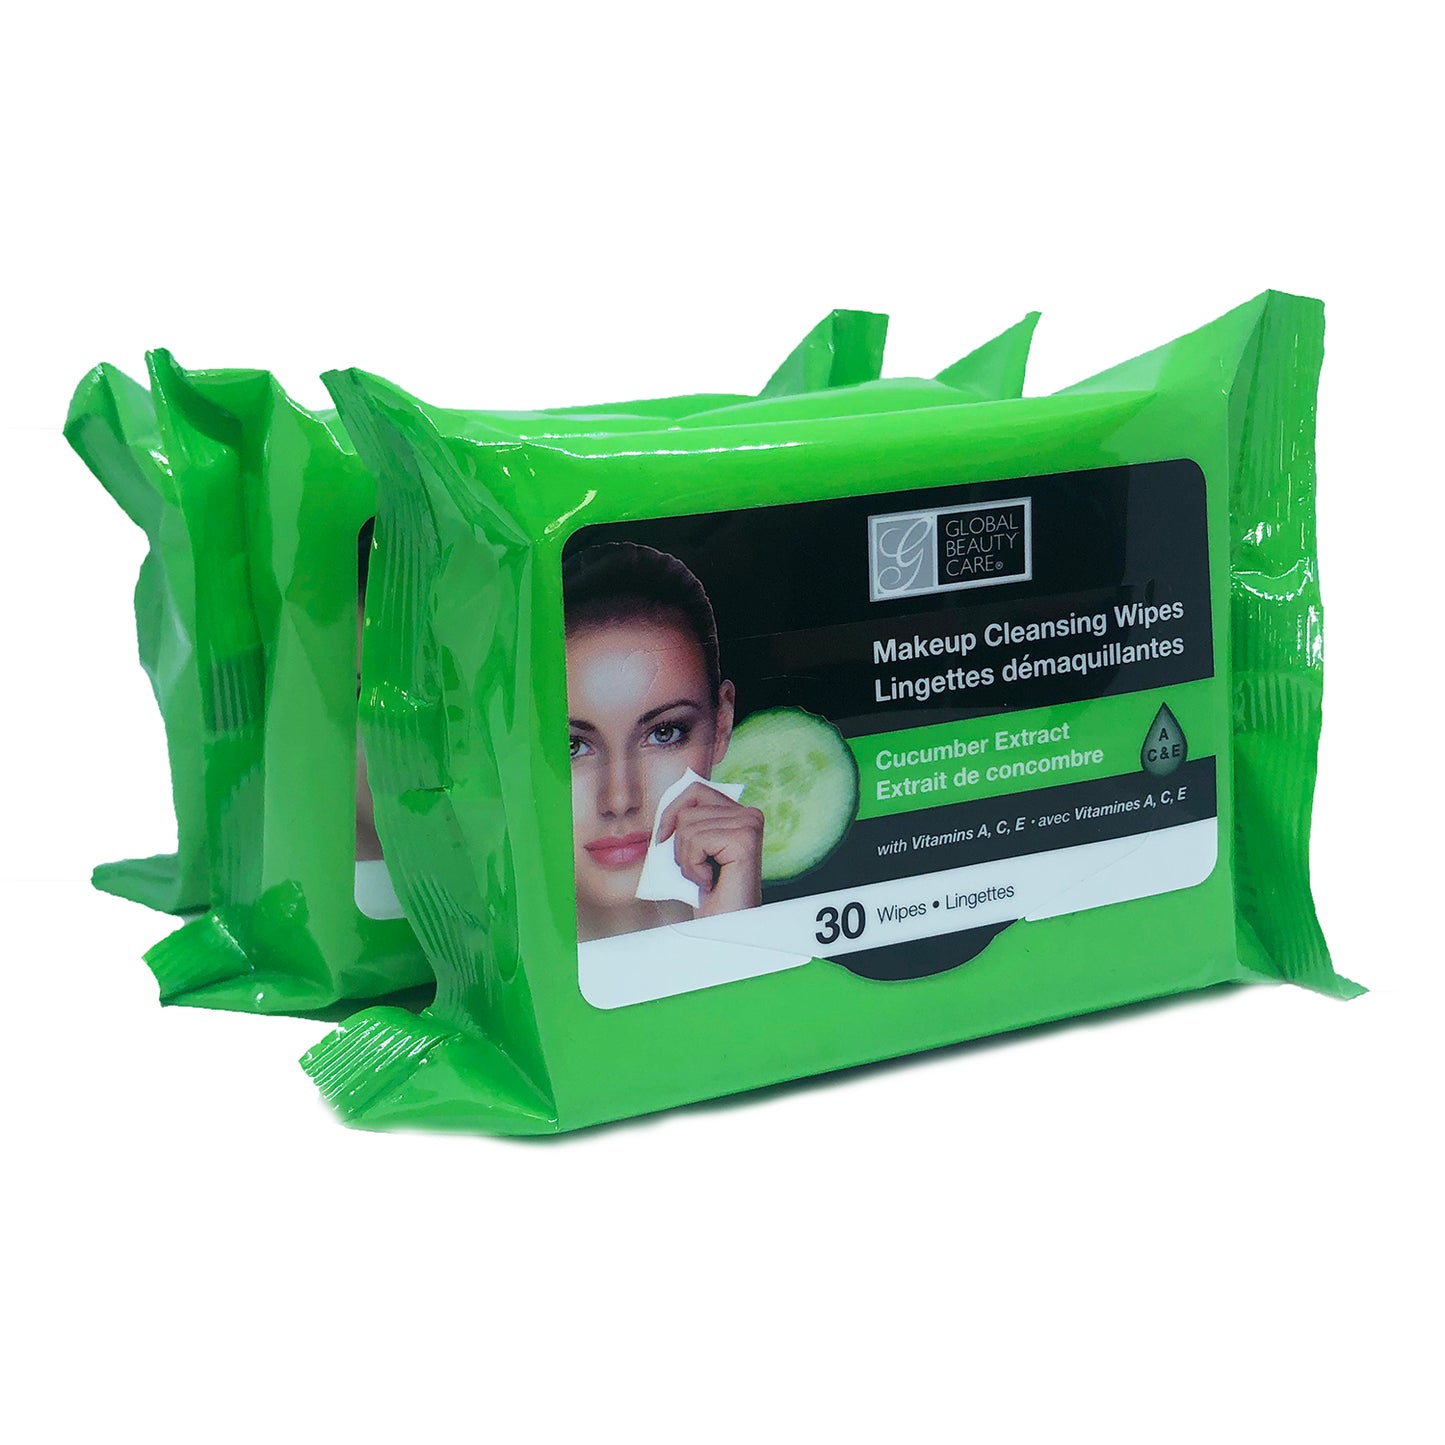 Makeup Cleansing Wipes Cucumber Extract 30 wipes "3-PACK" by Global Beauty Care